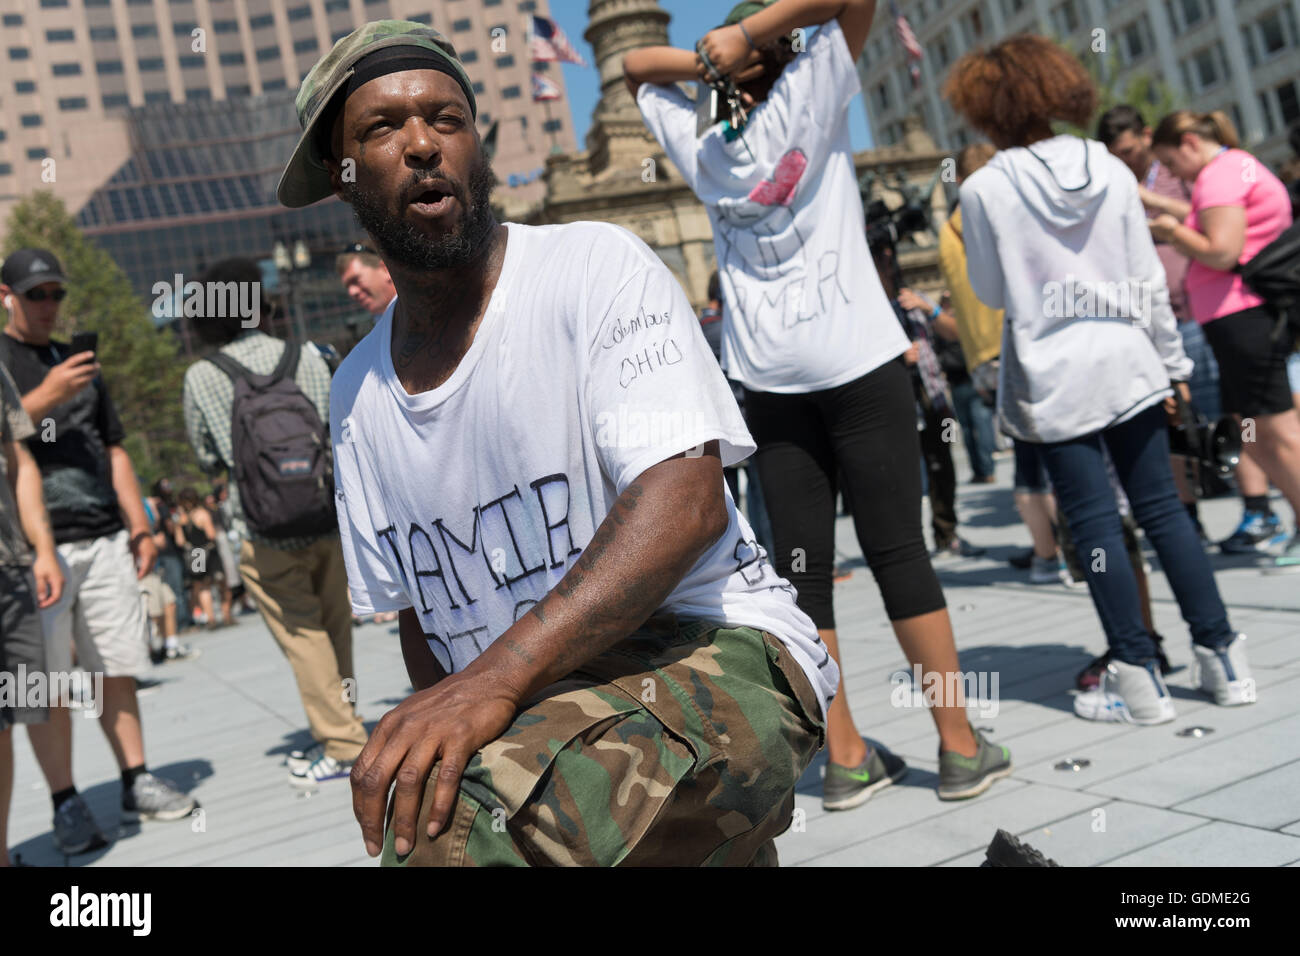 Cleveland, Ohio, USA. 19th July, 2016. A protestor brings attention to the shooting of Tamir Rice, a 12-year-old boy shot dead by police during a rally in Public Square near the Republican National Convention July 19, 2016 in Cleveland, Ohio. Credit:  Planetpix/Alamy Live News Stock Photo